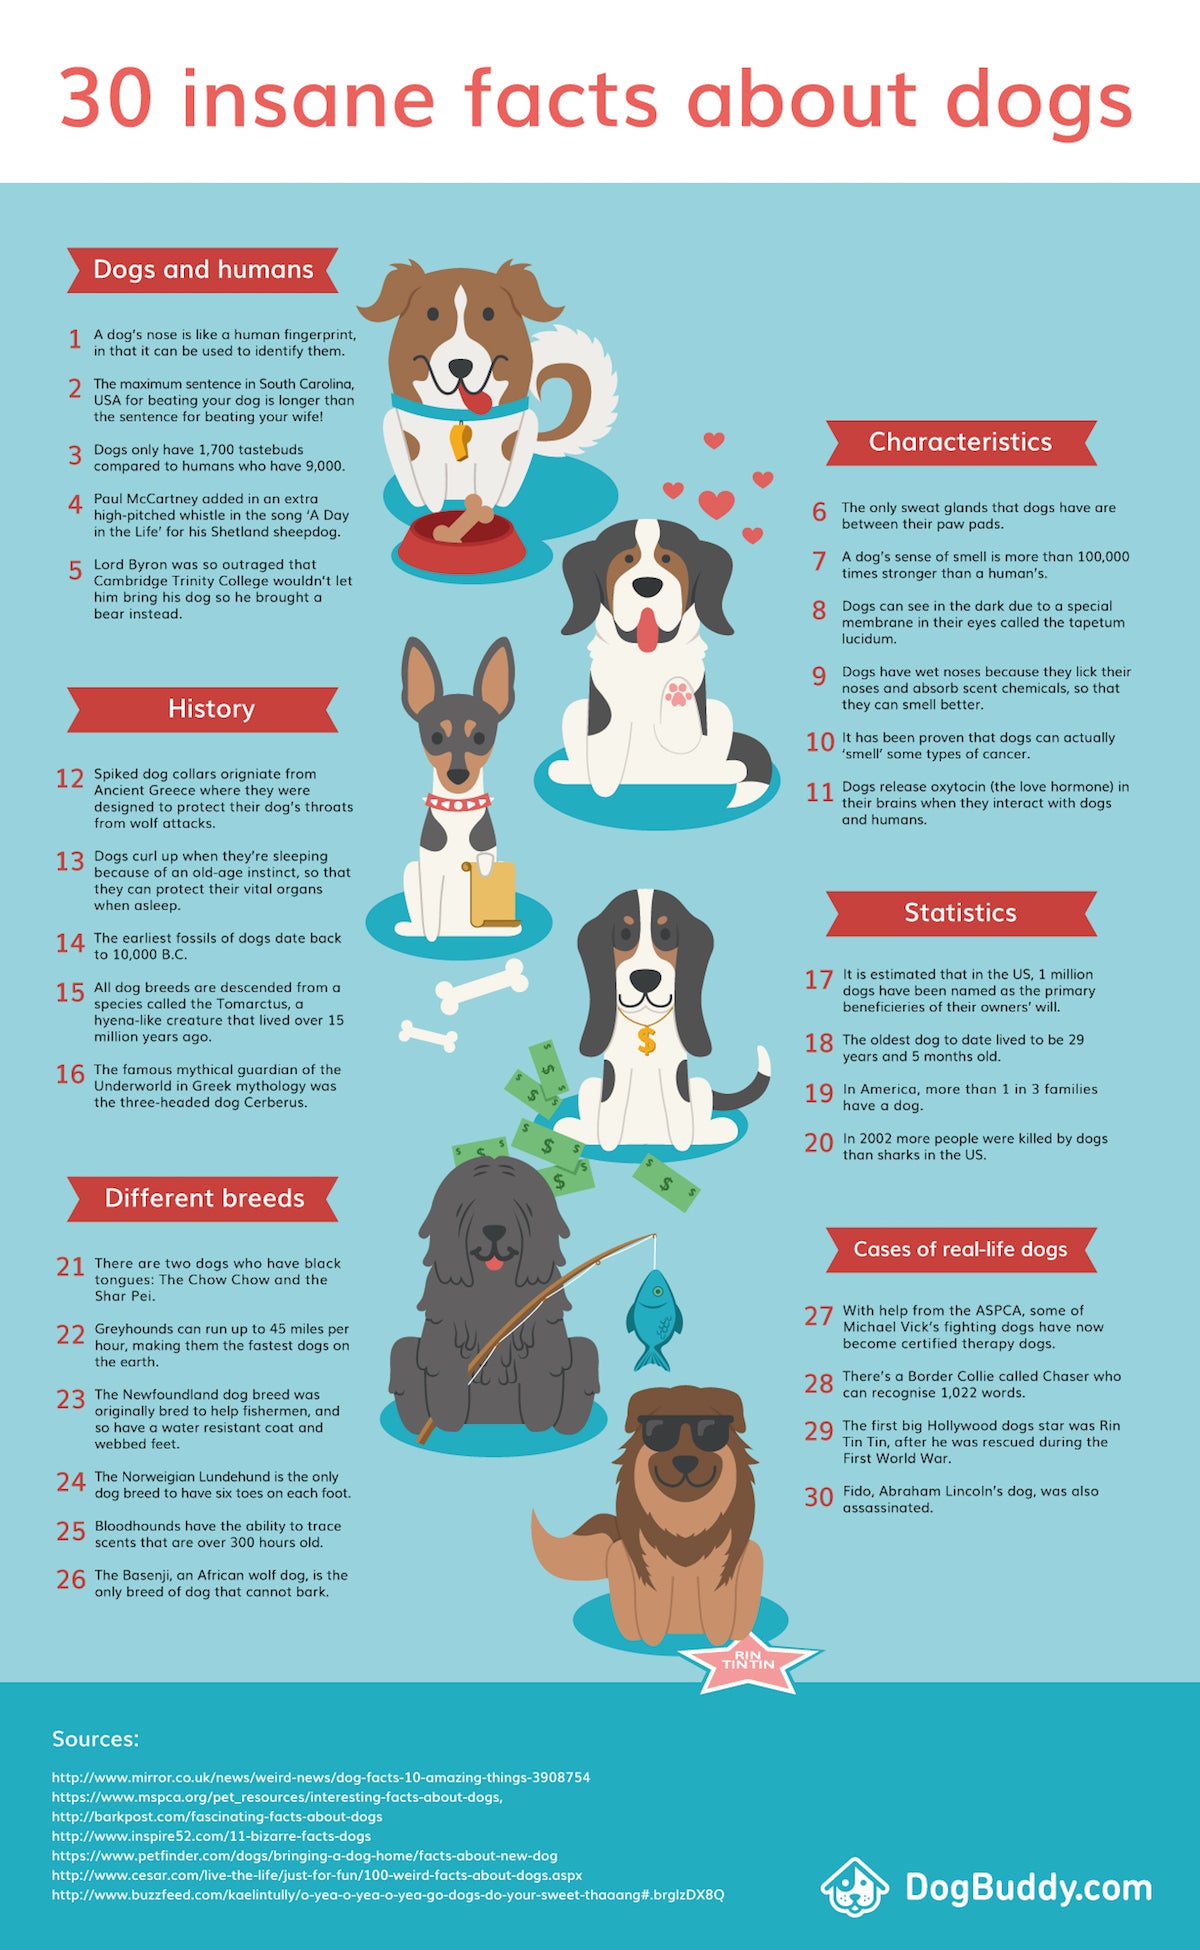 30 Dog Fun Facts You May Have Never Known Vanillapup